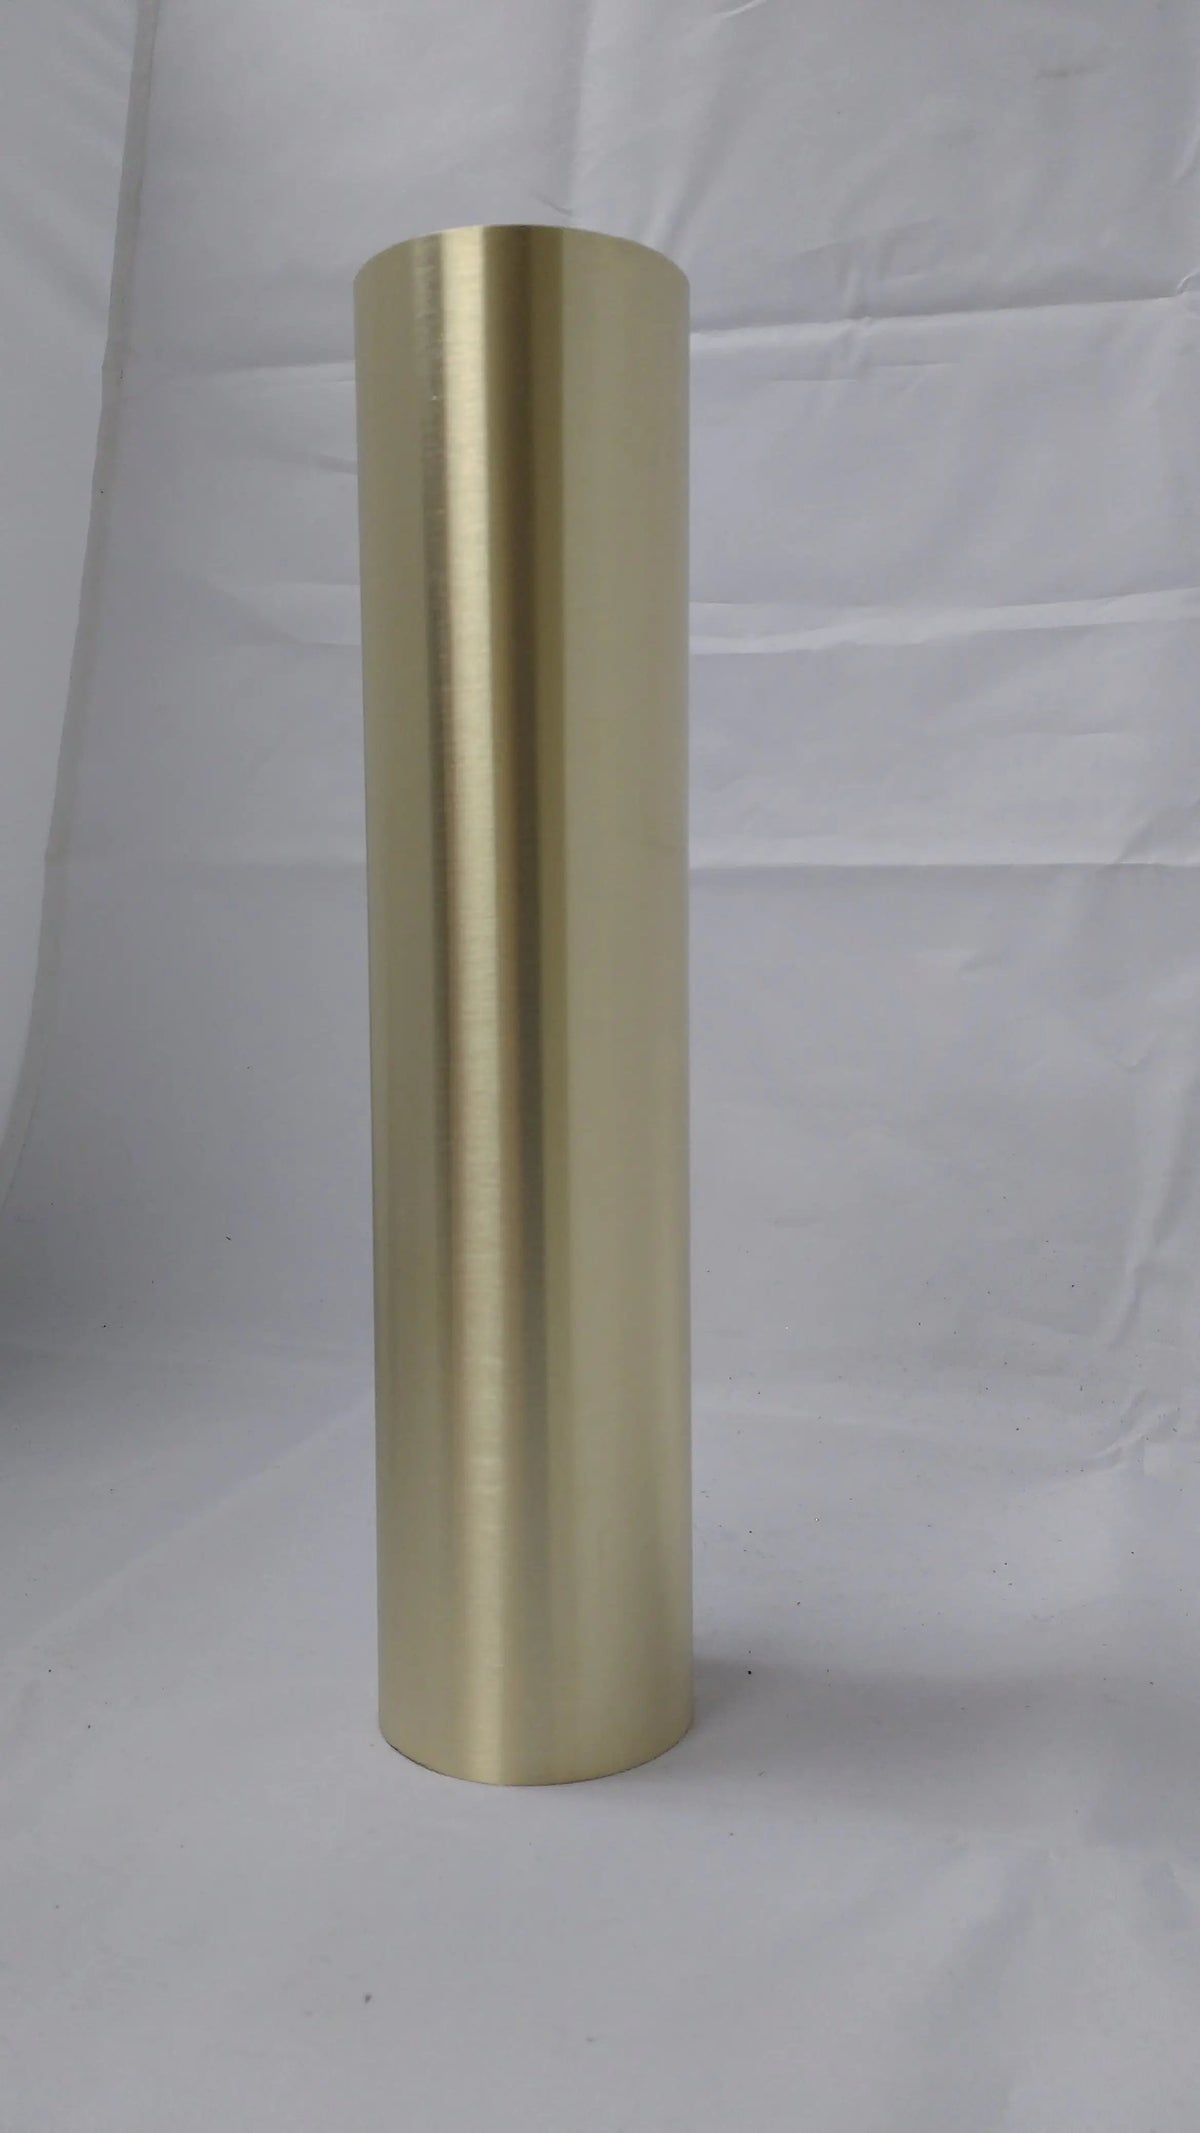 6 Foot Long Foot Rail Kit in Polished Brass - Trade Diversified